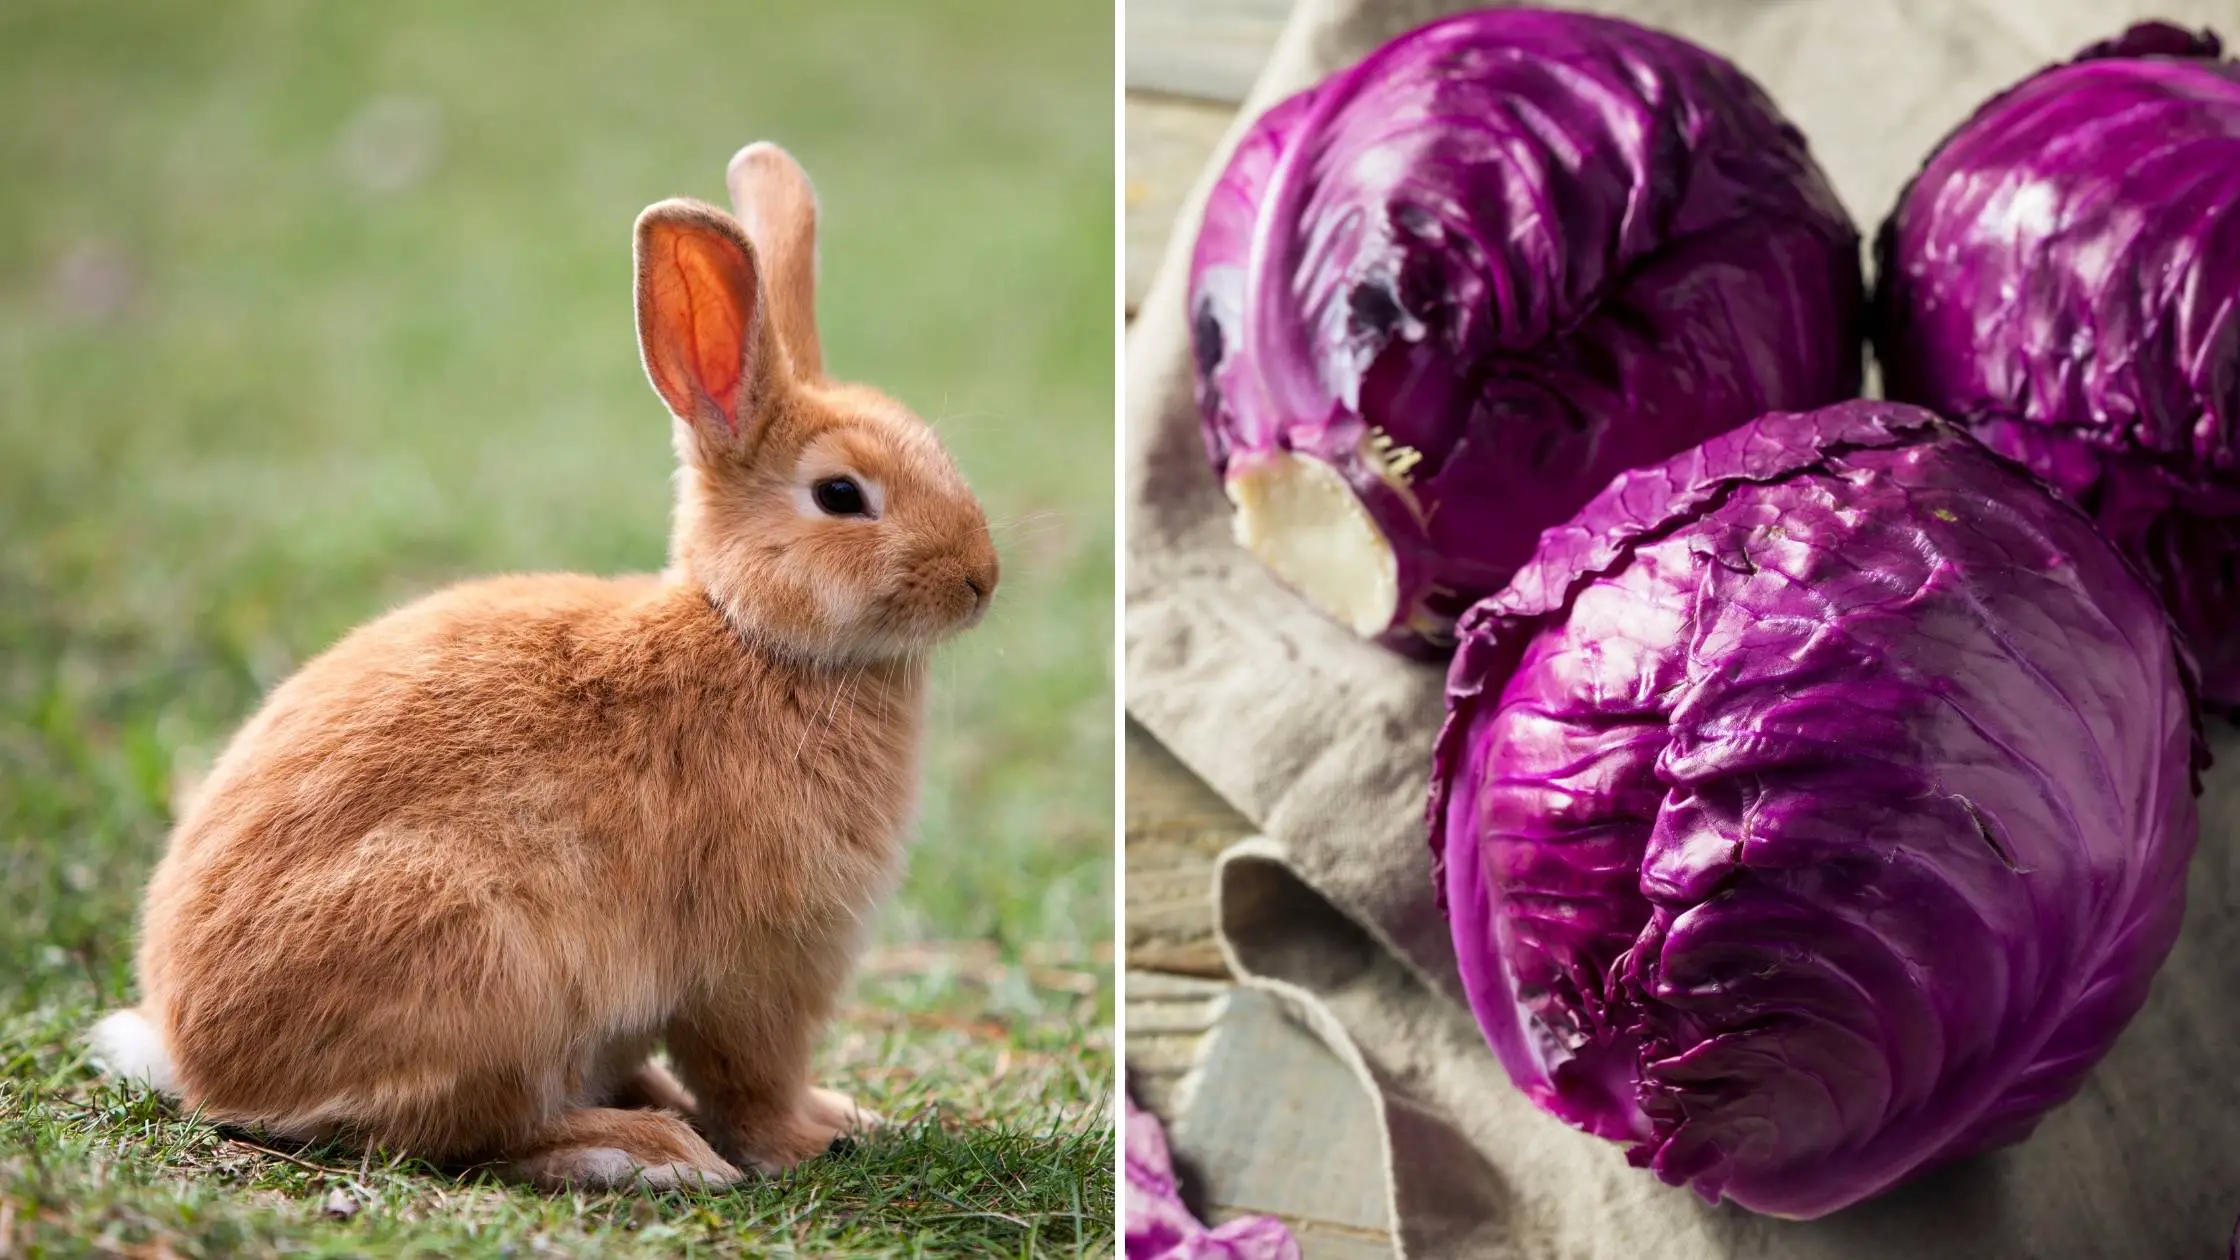 can rabbits eat cabbage